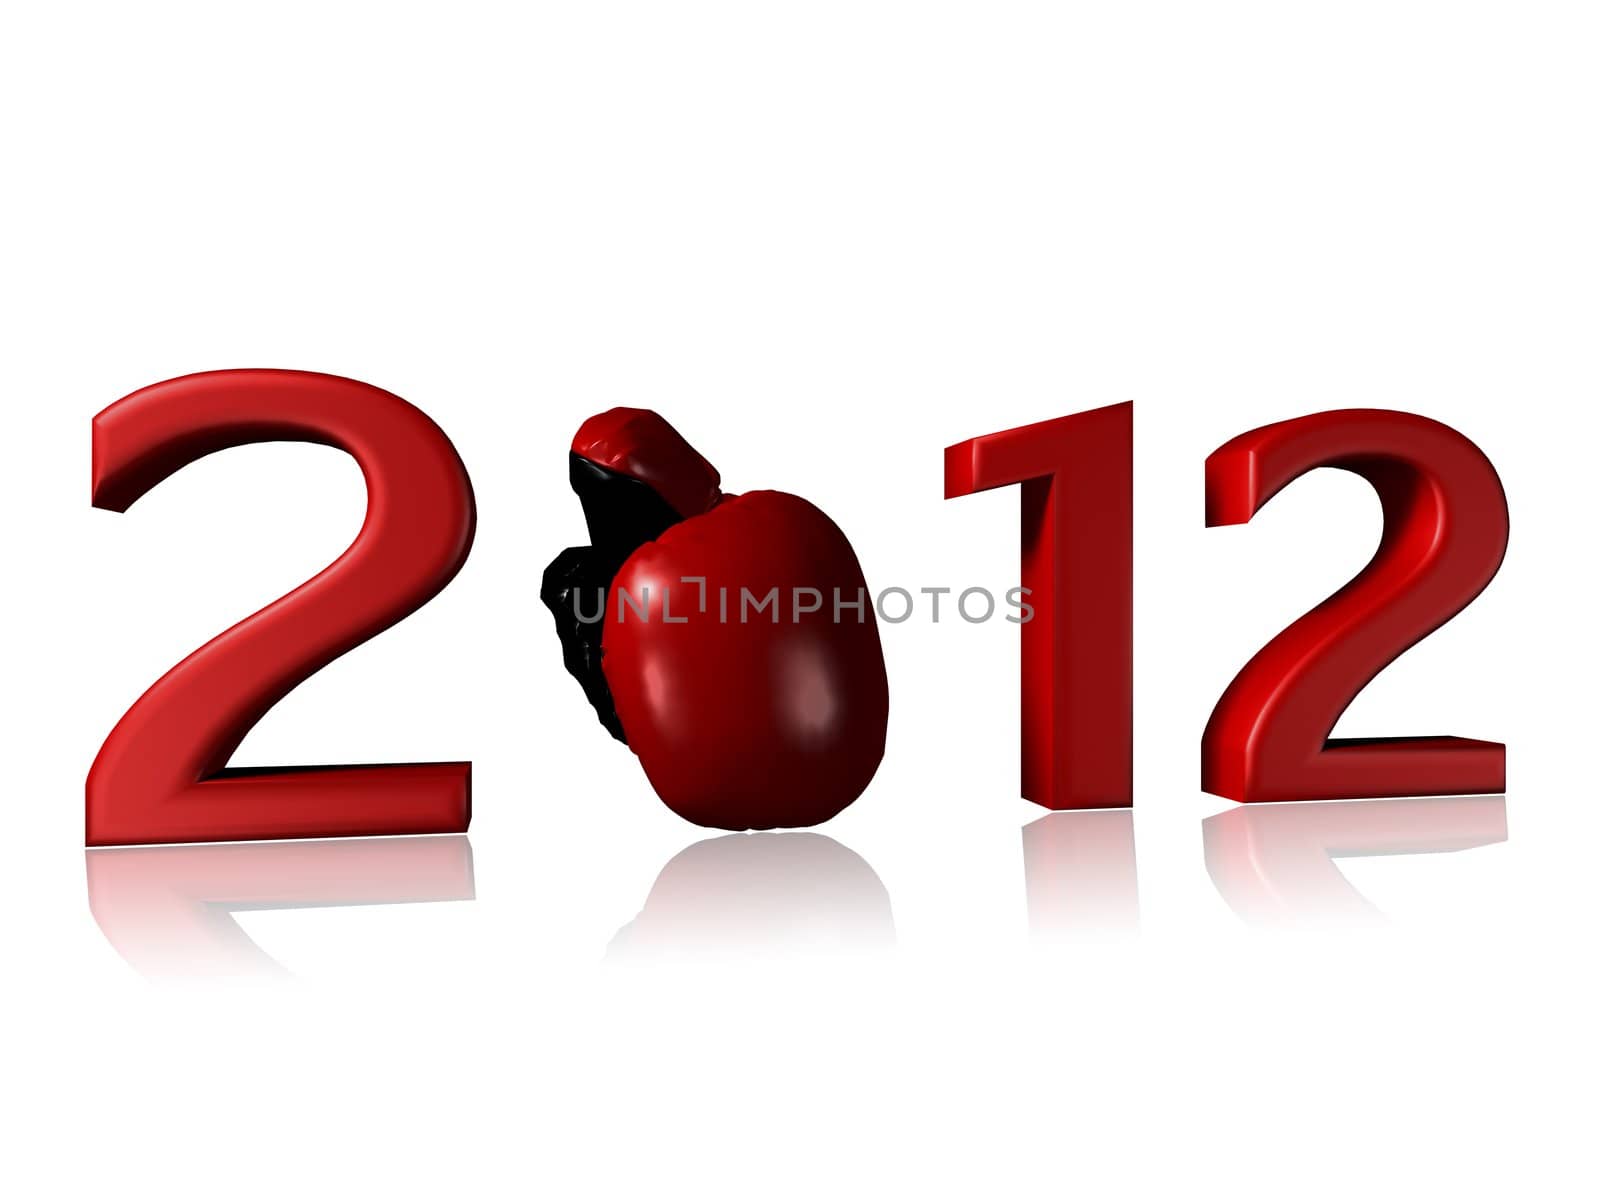 2012 boxing design on a white background with a little reflection